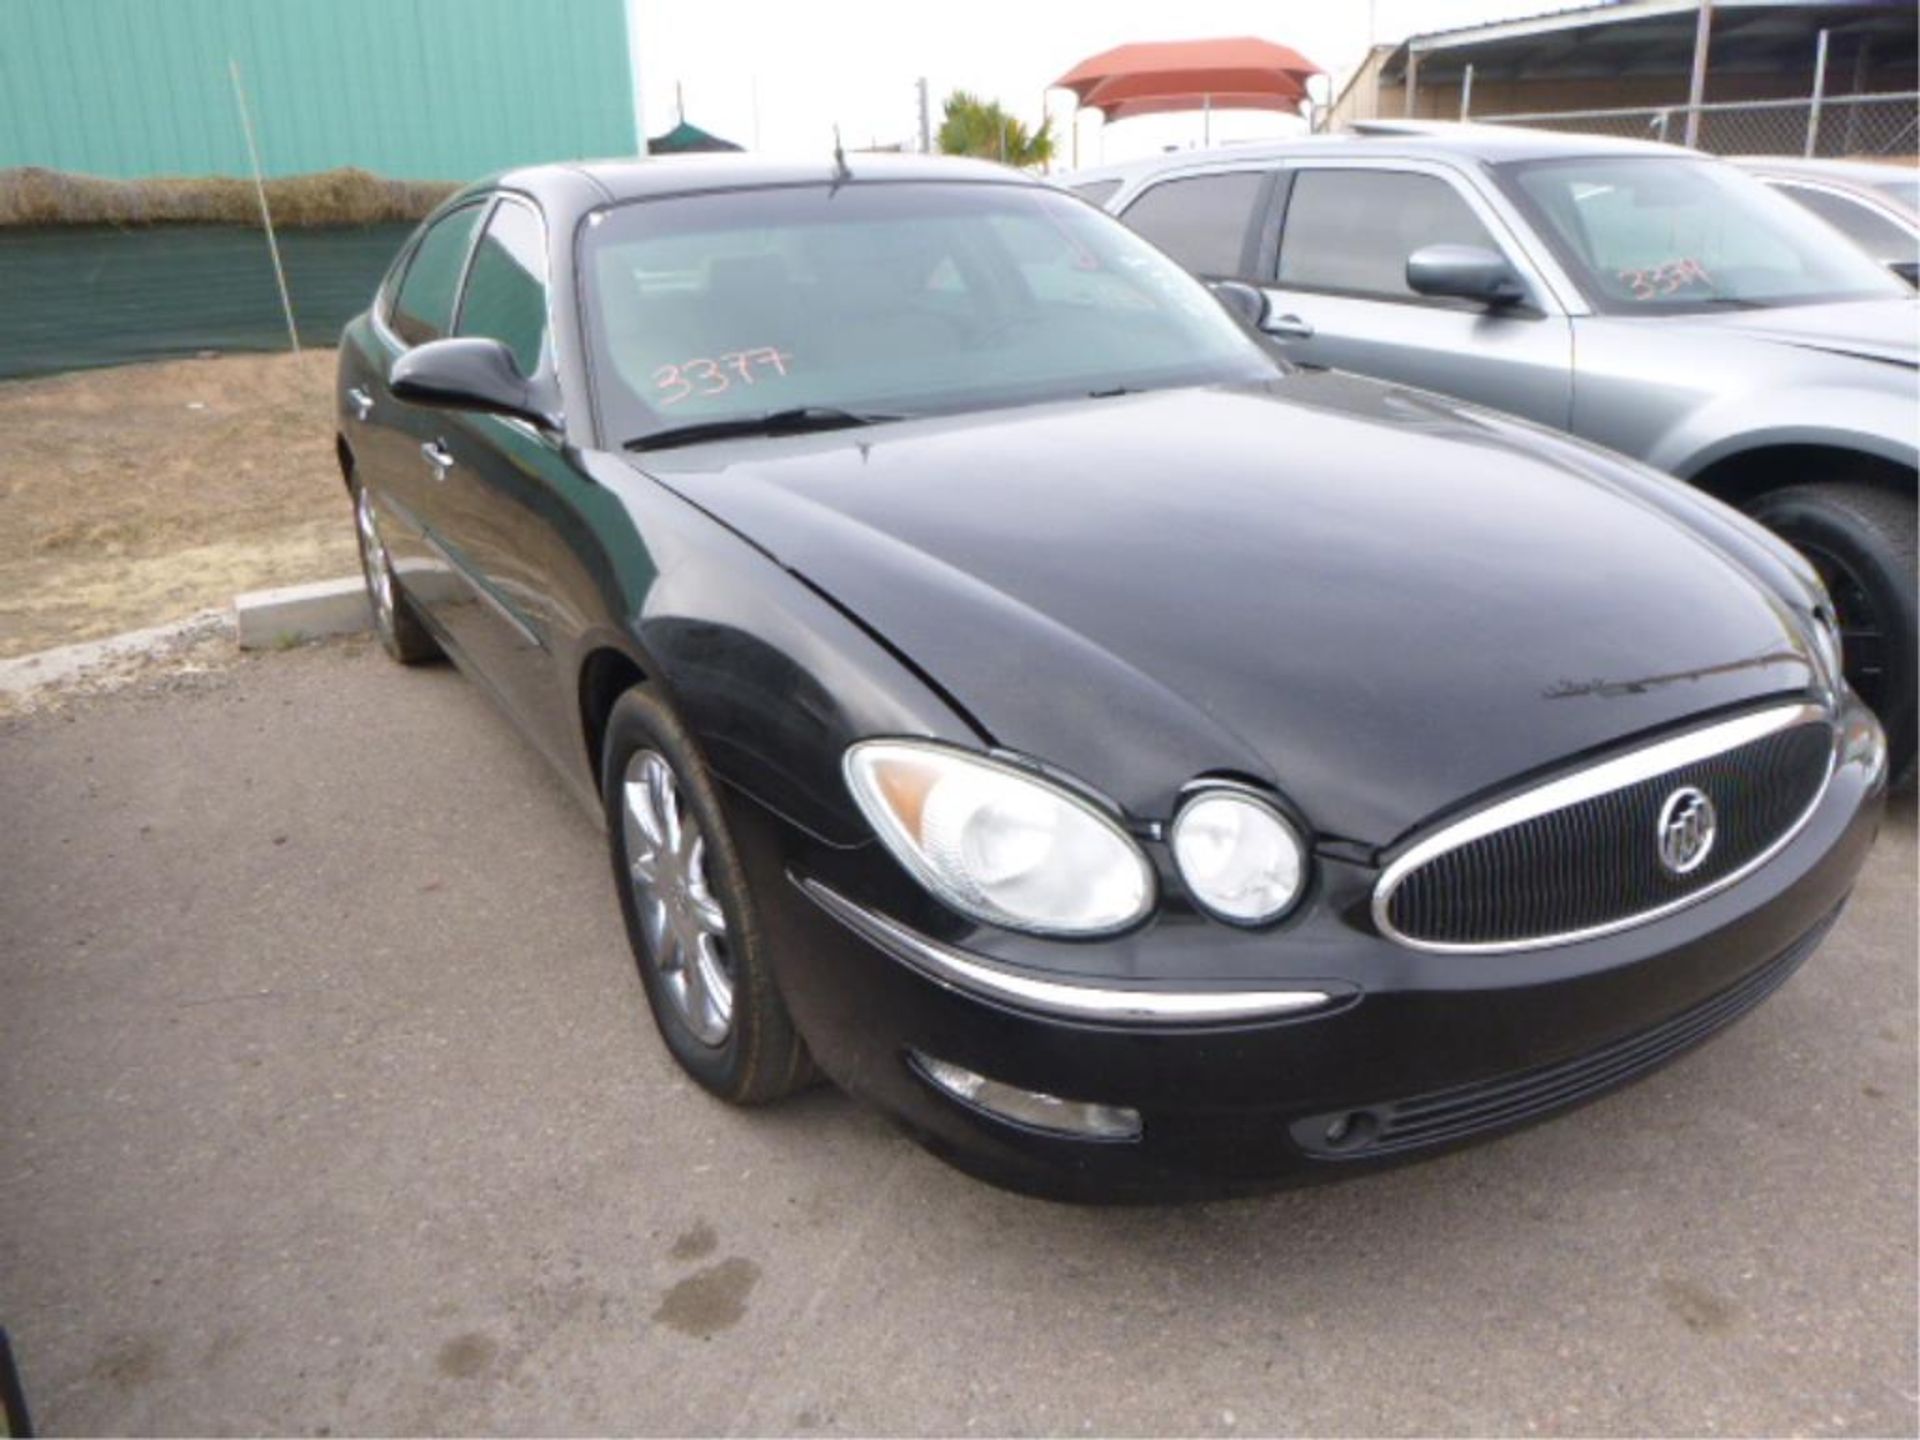 2005 Buick LaCrosse - Image 4 of 10